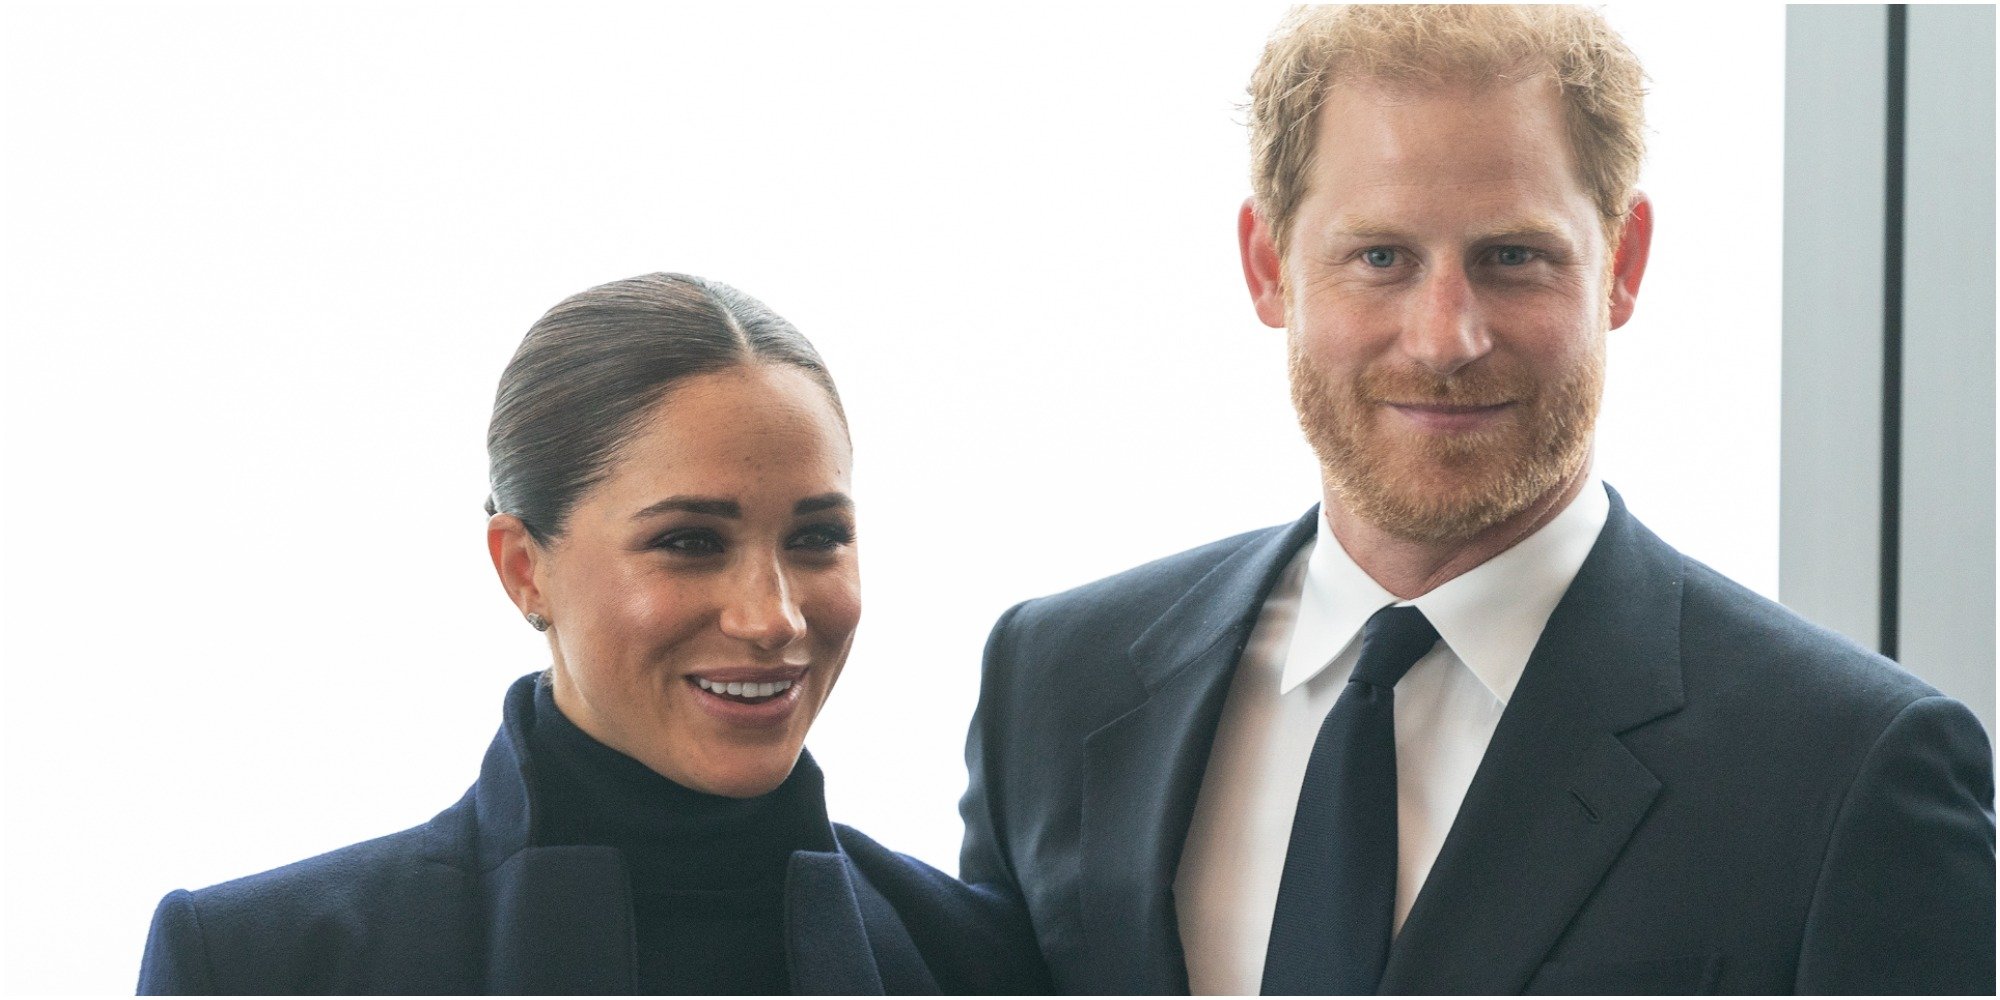 Meghan Markle and Prince Harry smile as they stand next to each other during a visit to One World Trade Center in New York City.